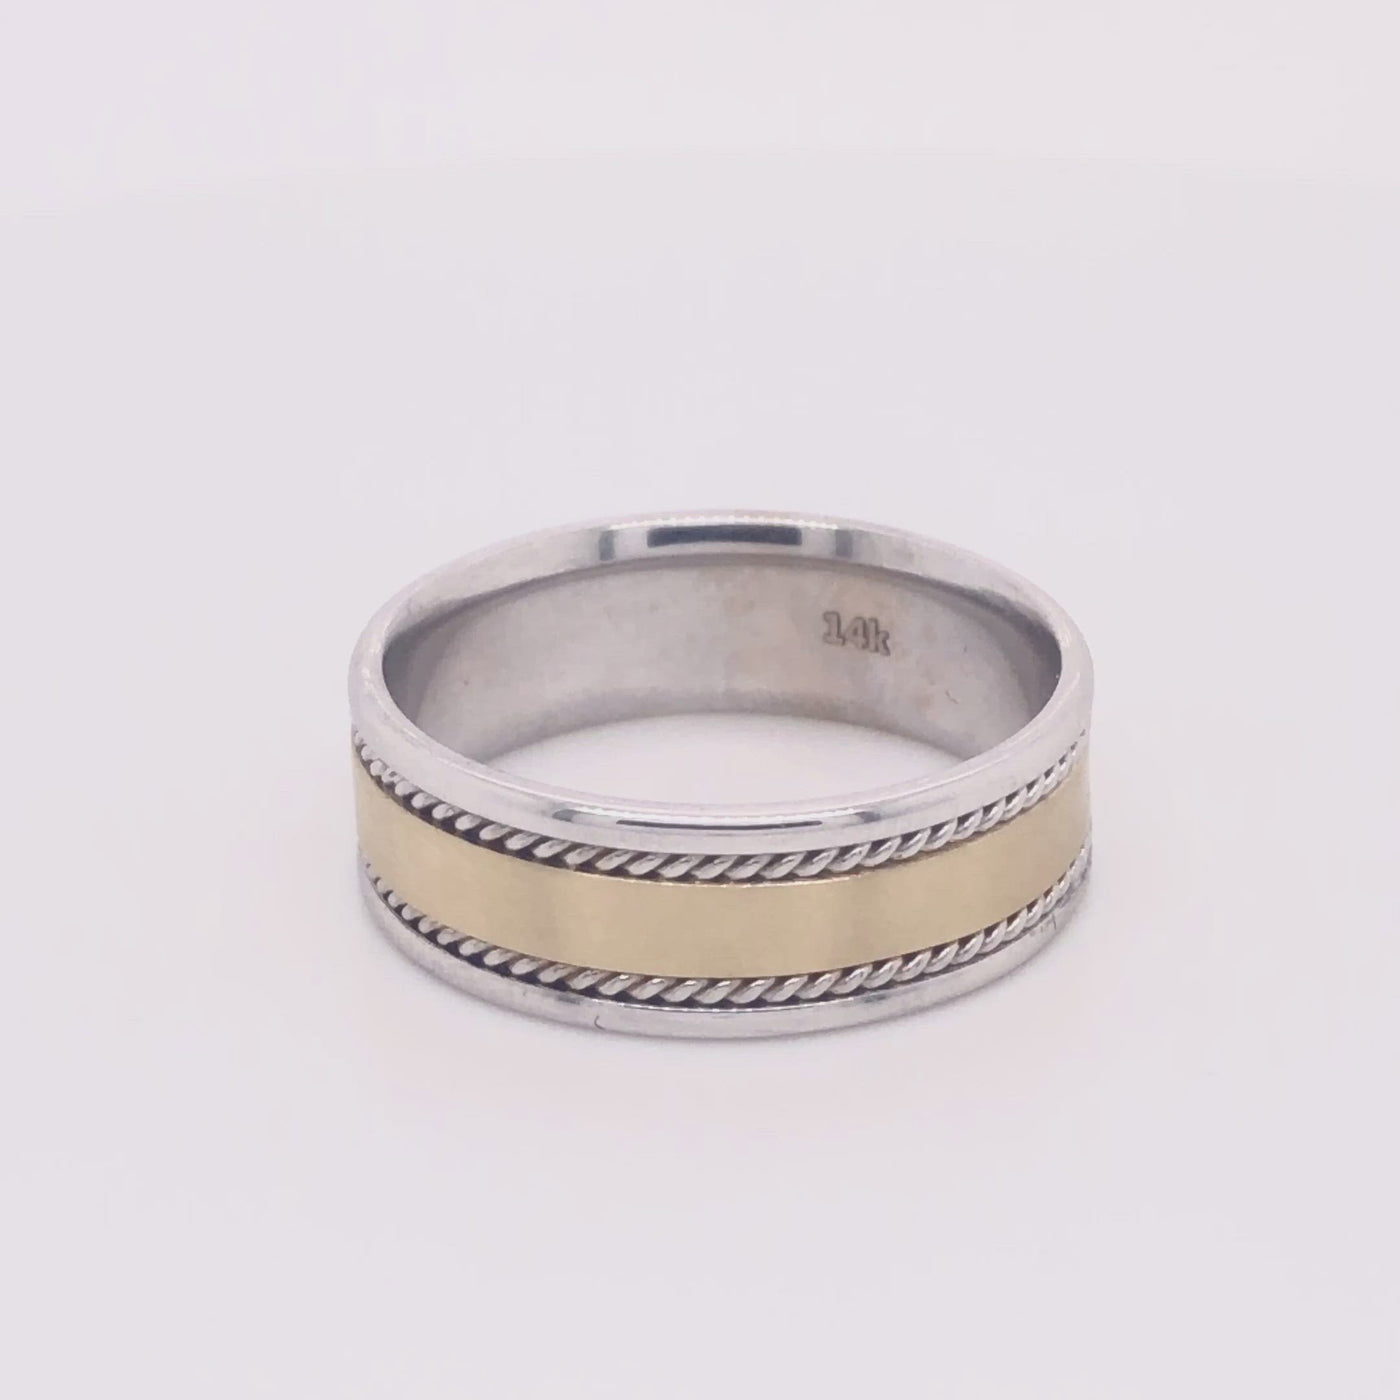 7MM Two Tone Solid Gold Wedding Band